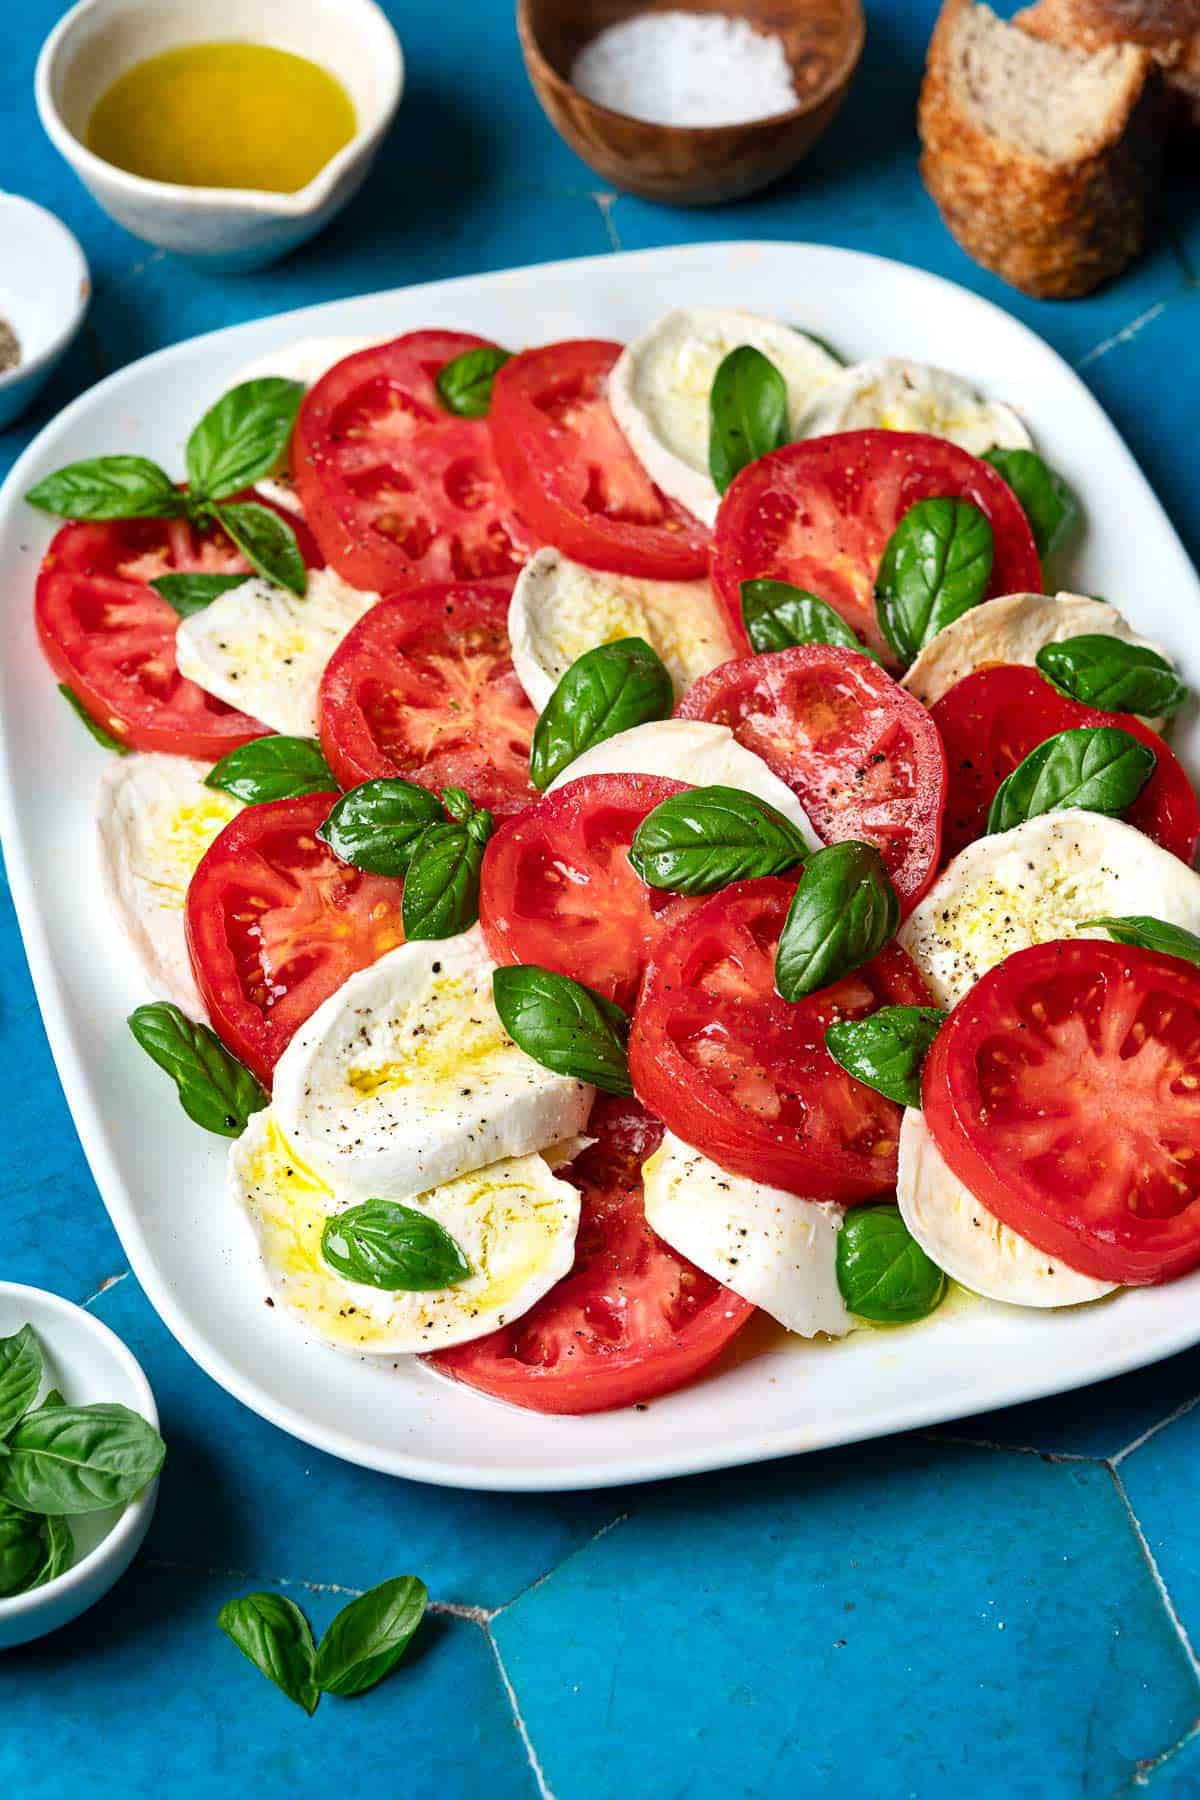 a caprese salad on a platter surrounded by pieces of crusty bread and bowls of olive oil, salt and basil leaves.